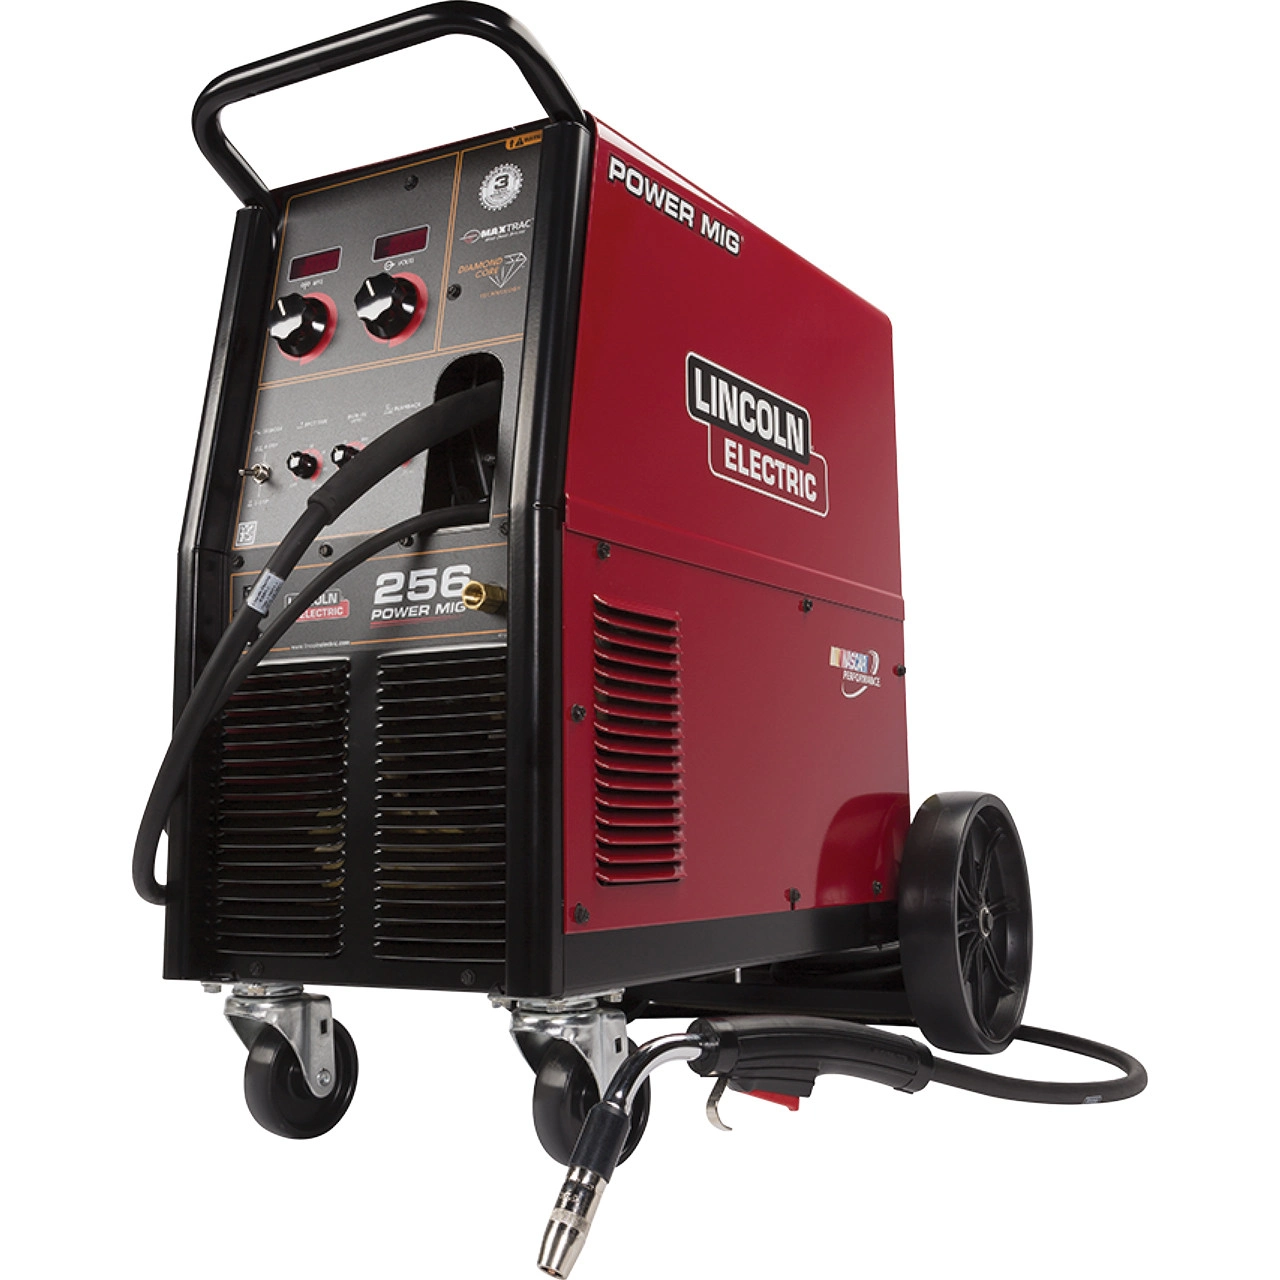 Image of a Lincoln 256 Power MIG Welder